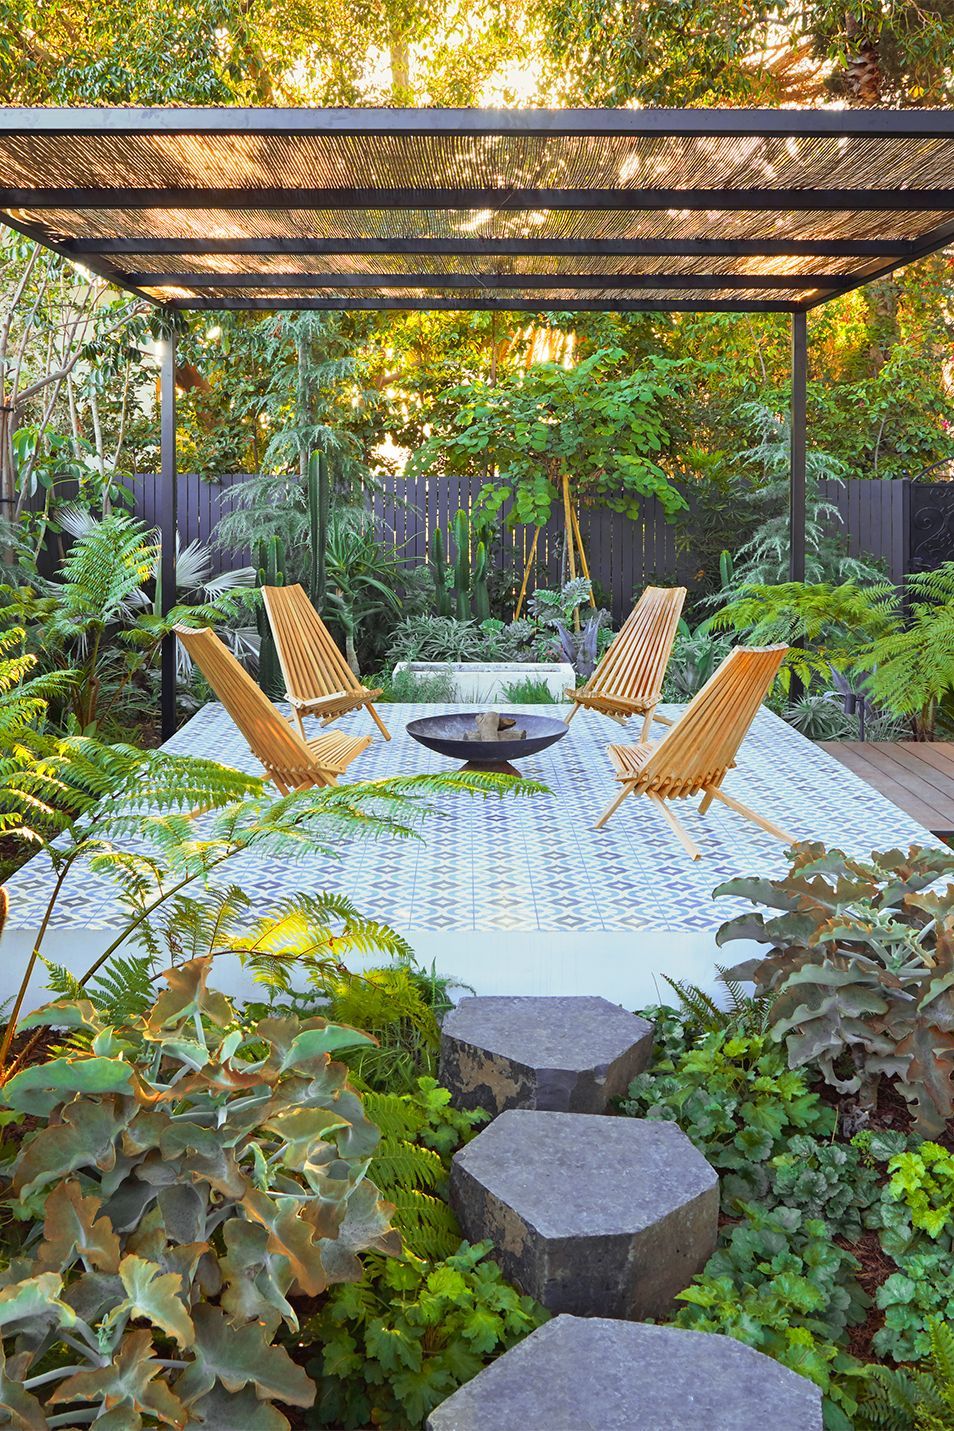 Small Outdoor Decor Ideas - How to Decorate Your Small Patio